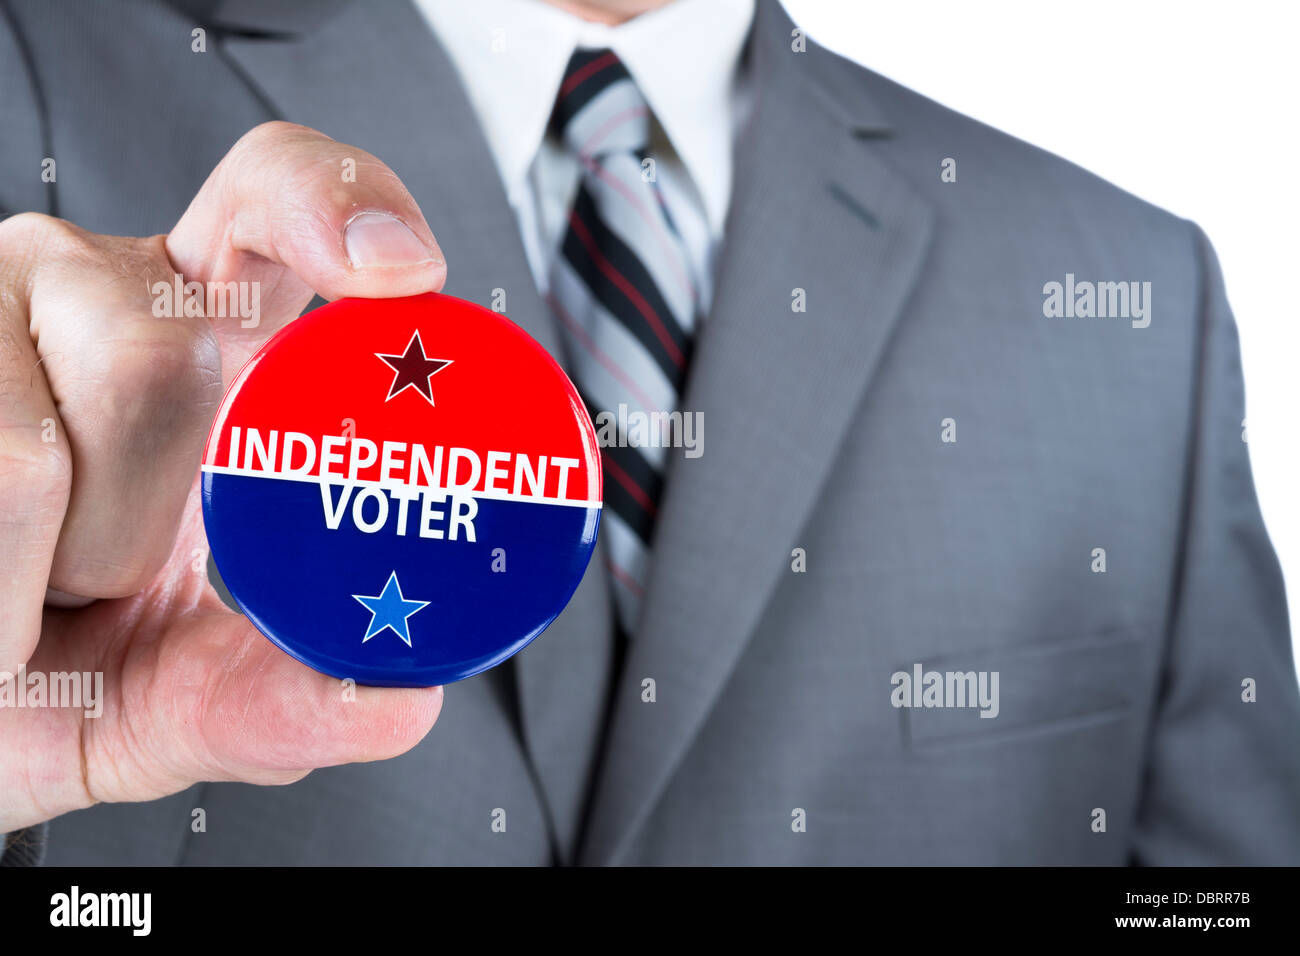 A man in a business suit holds out a political independent voter pin during elections. Stock Photo